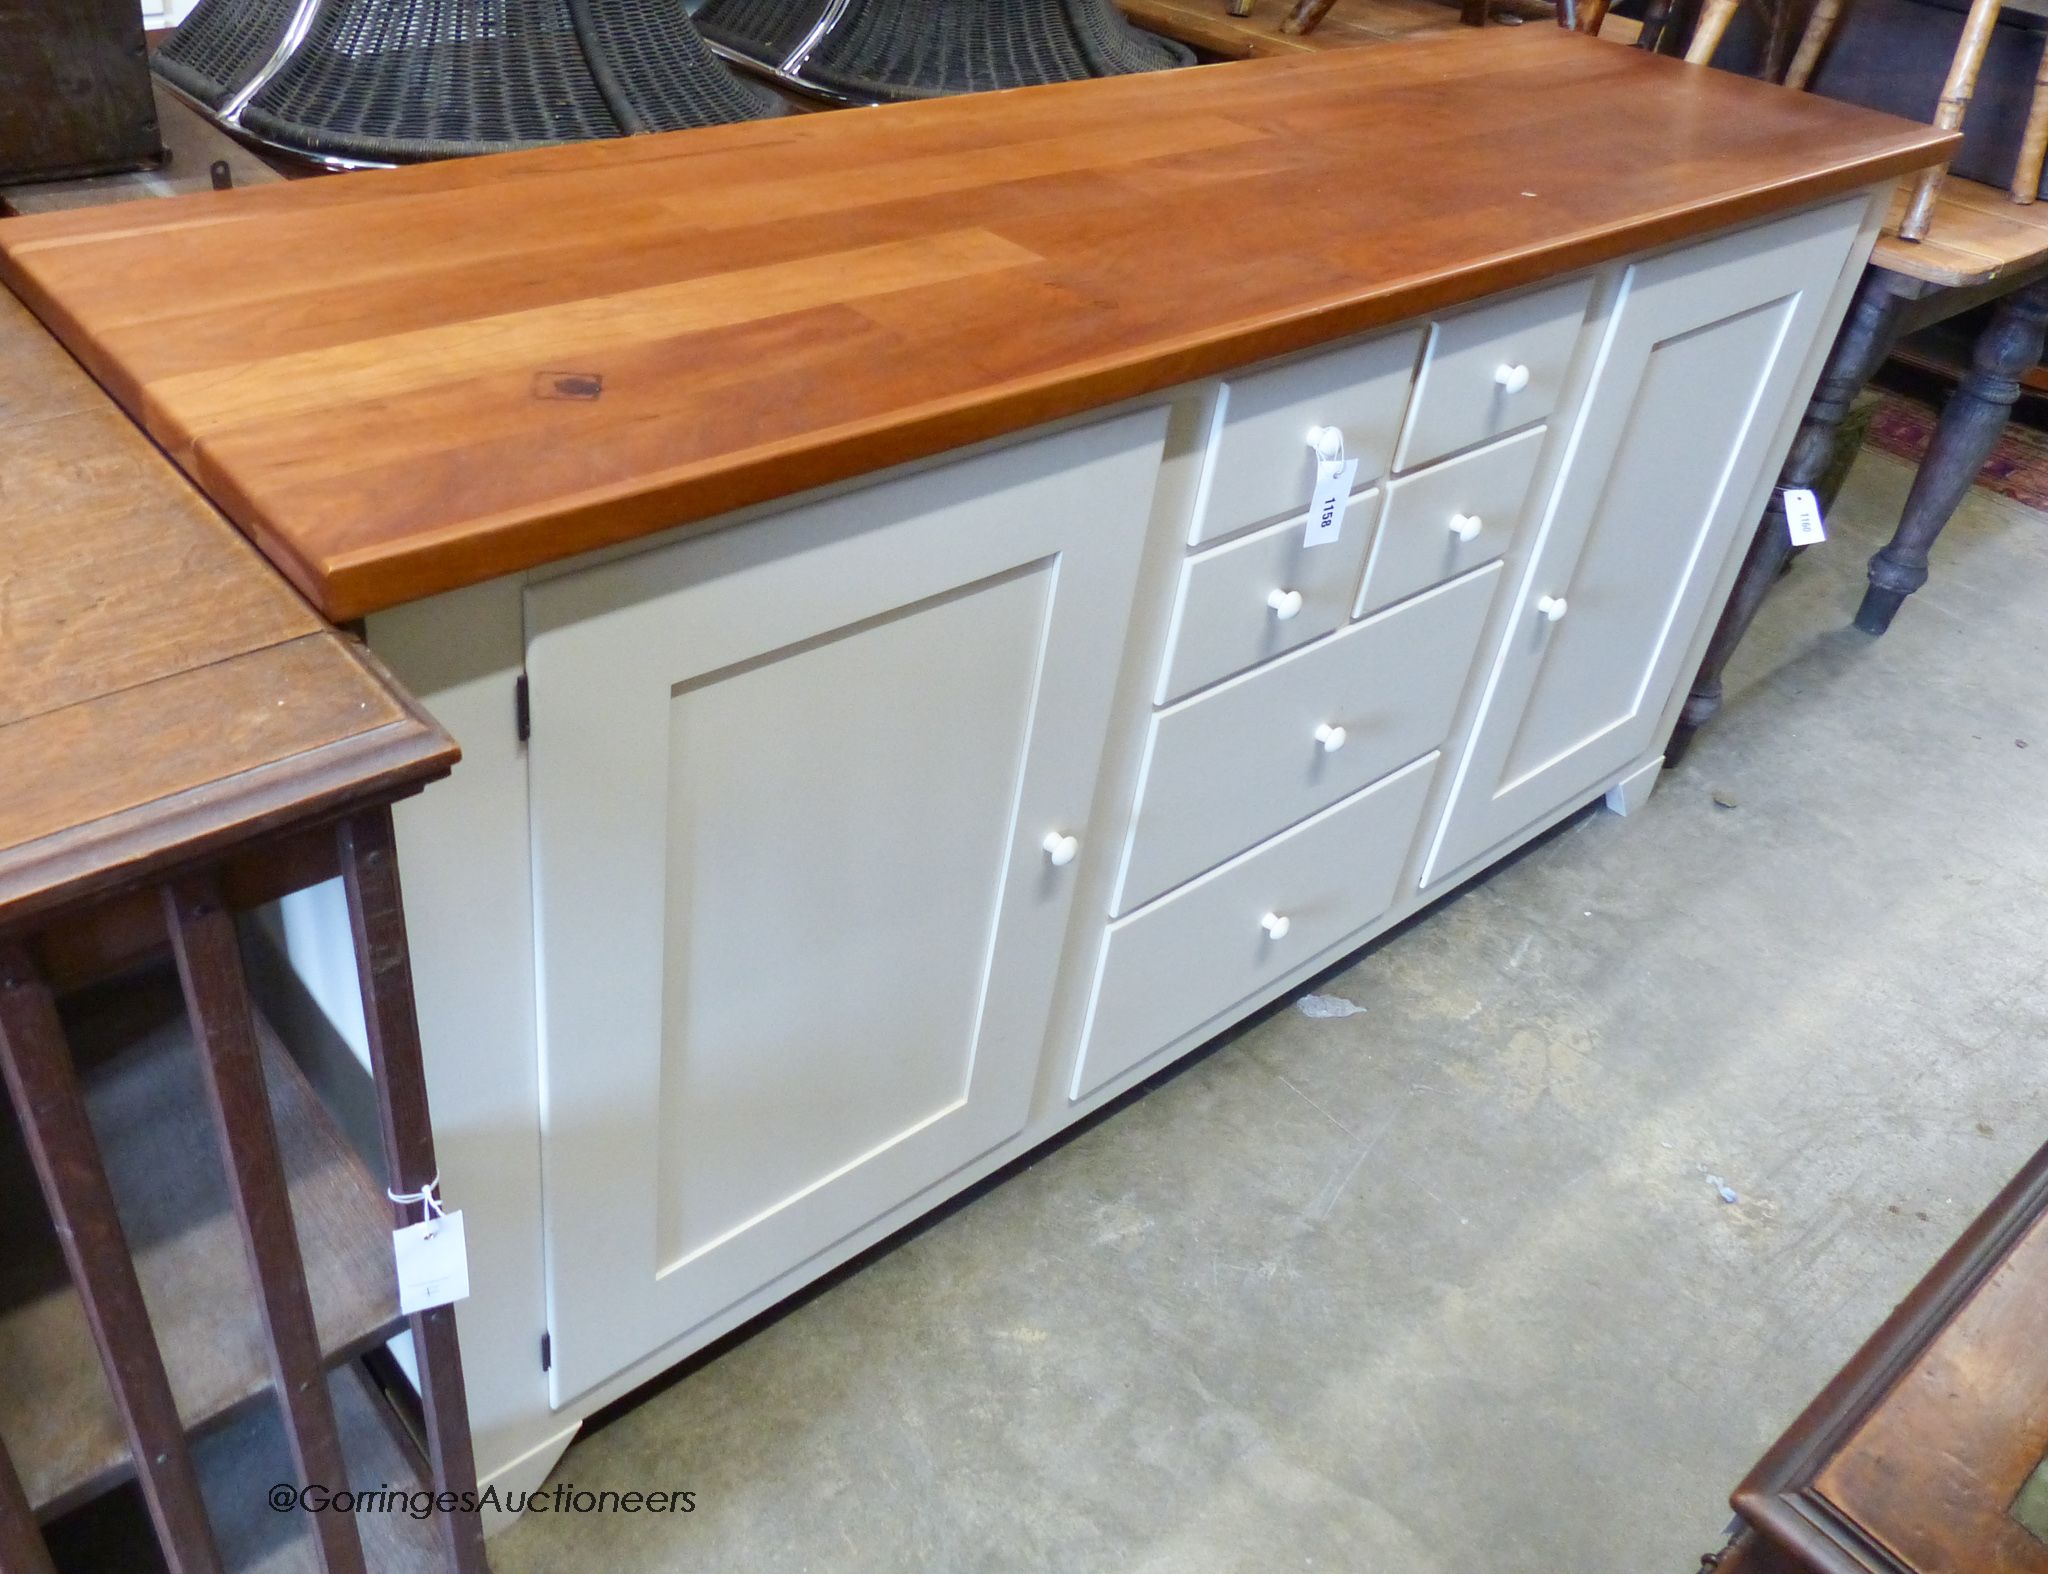 A modern white painted kitchen unit with hardwood top. W-182, D-51, H-90.